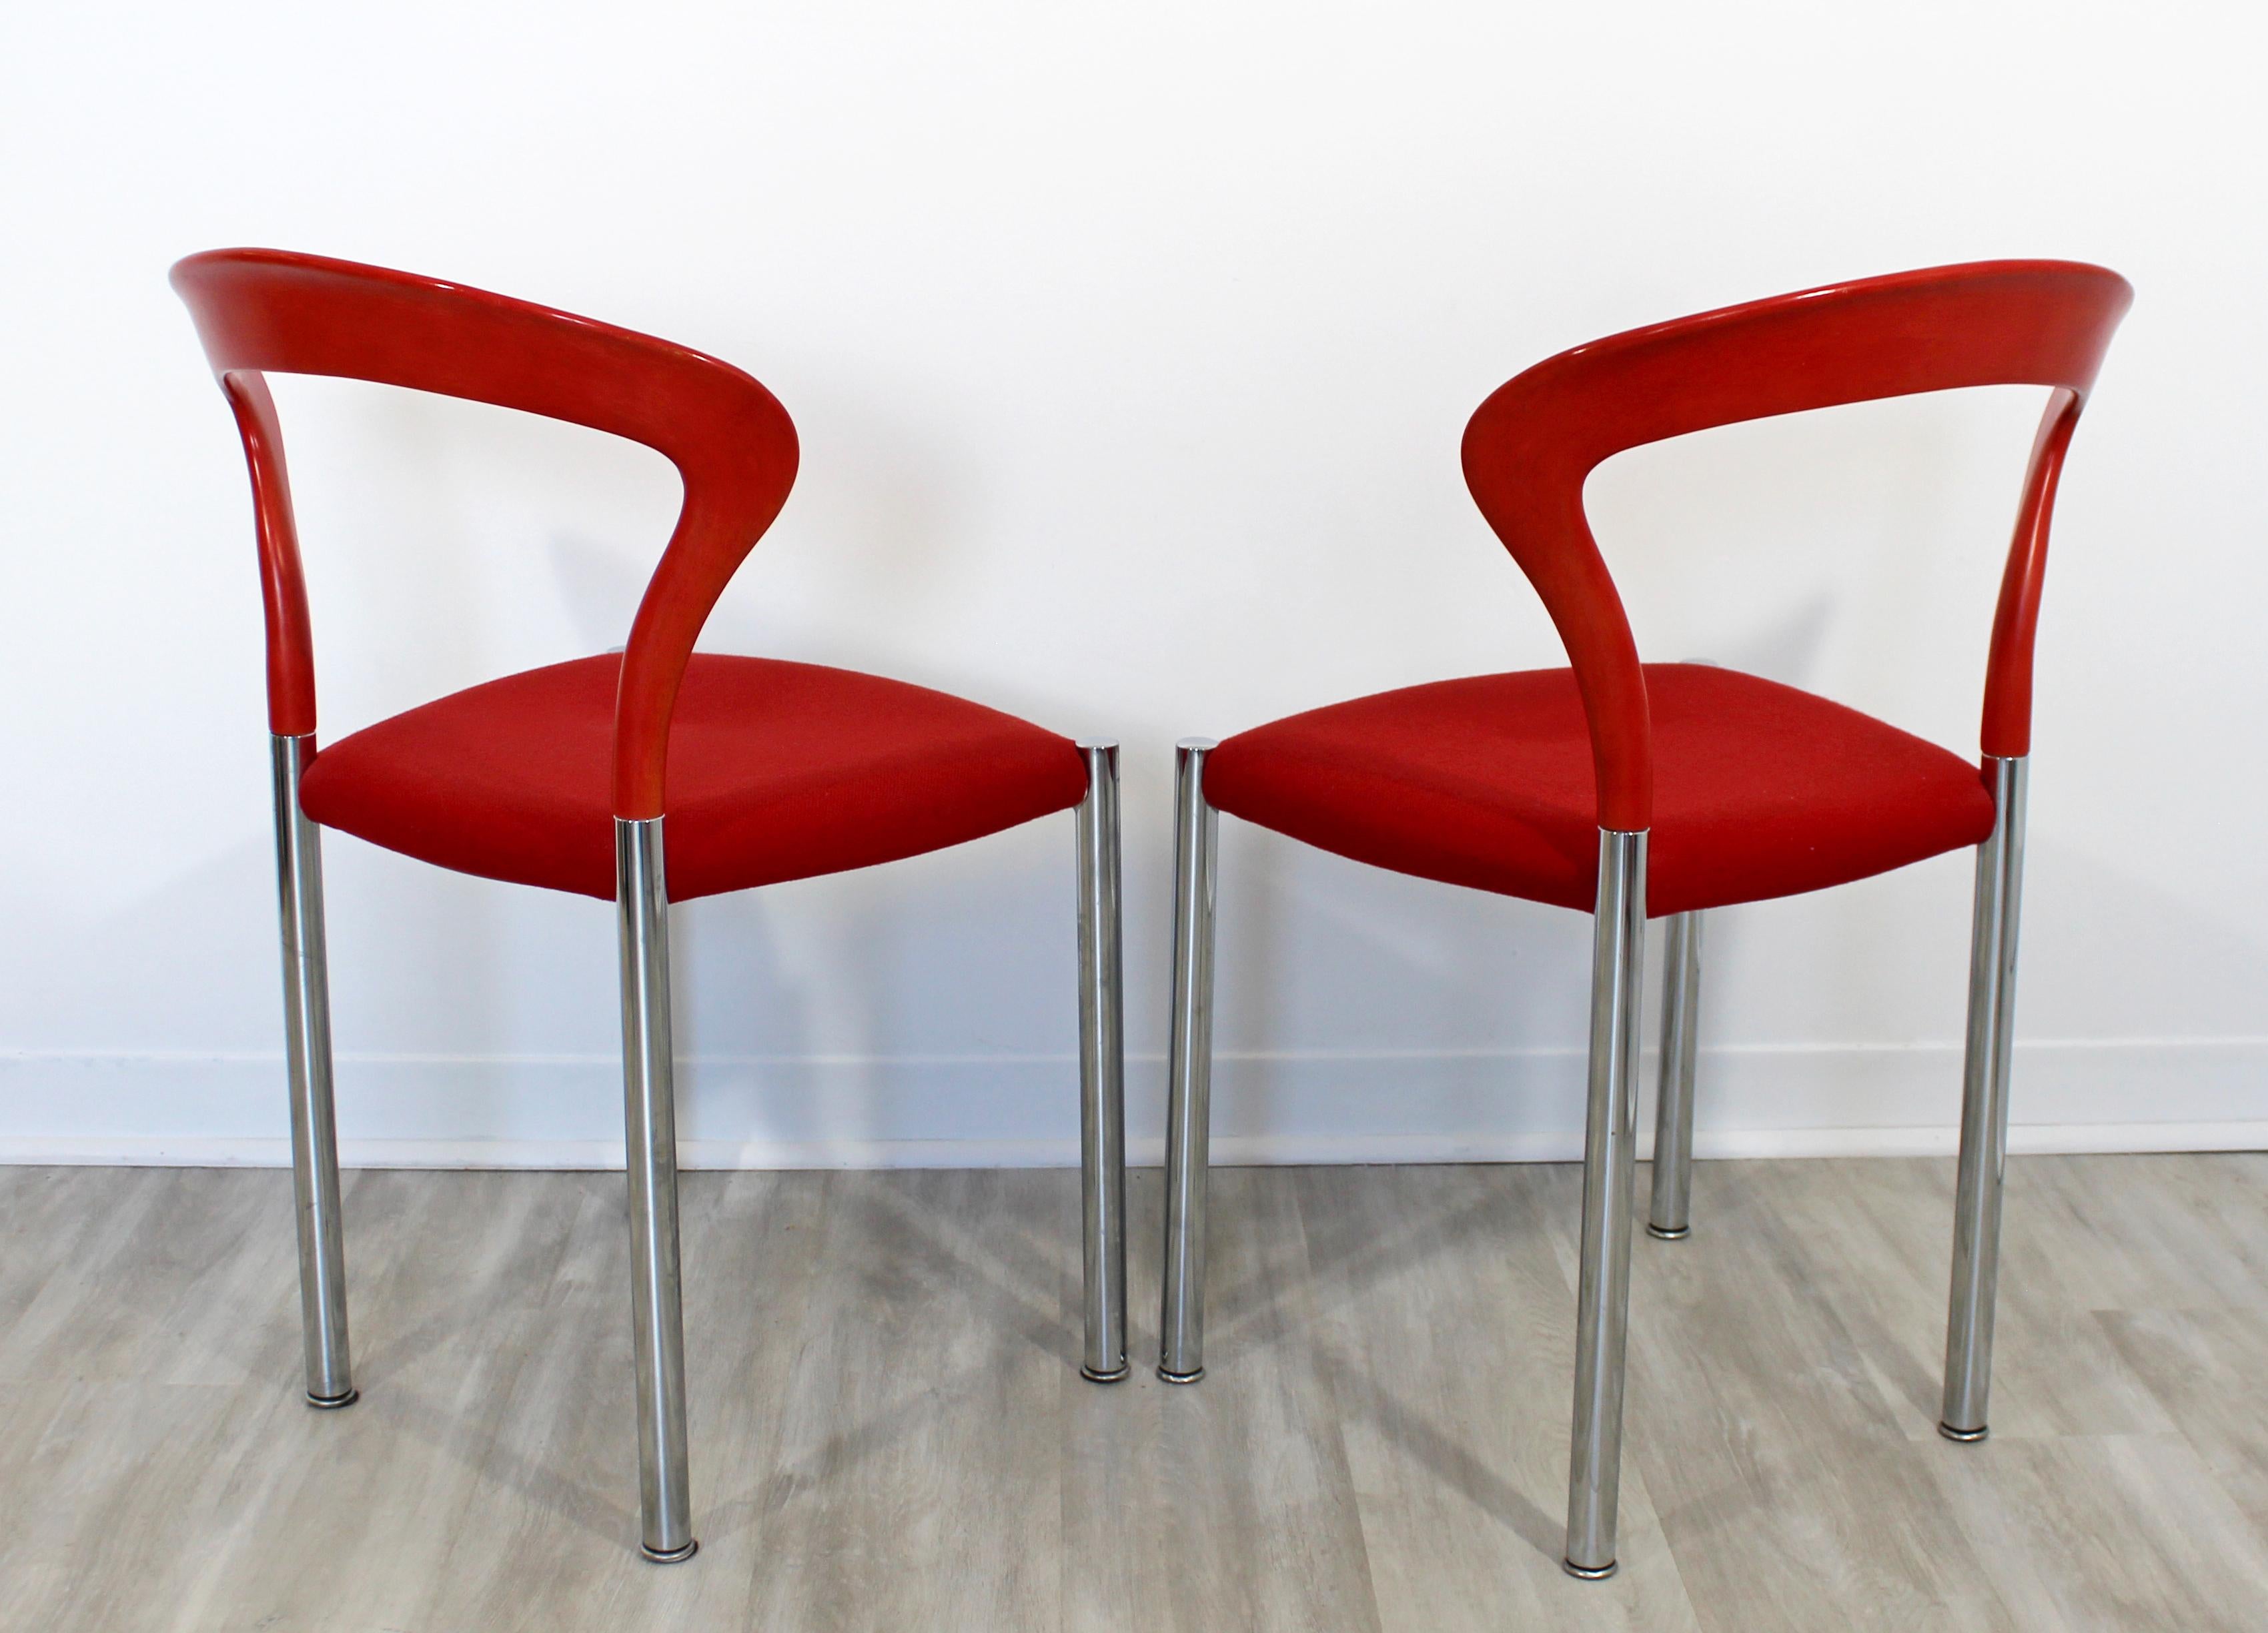 Late 20th Century Contemporary Modern Hartmut Lohmeyer Set of 5 Red Lotus Stacking Chairs Kusch